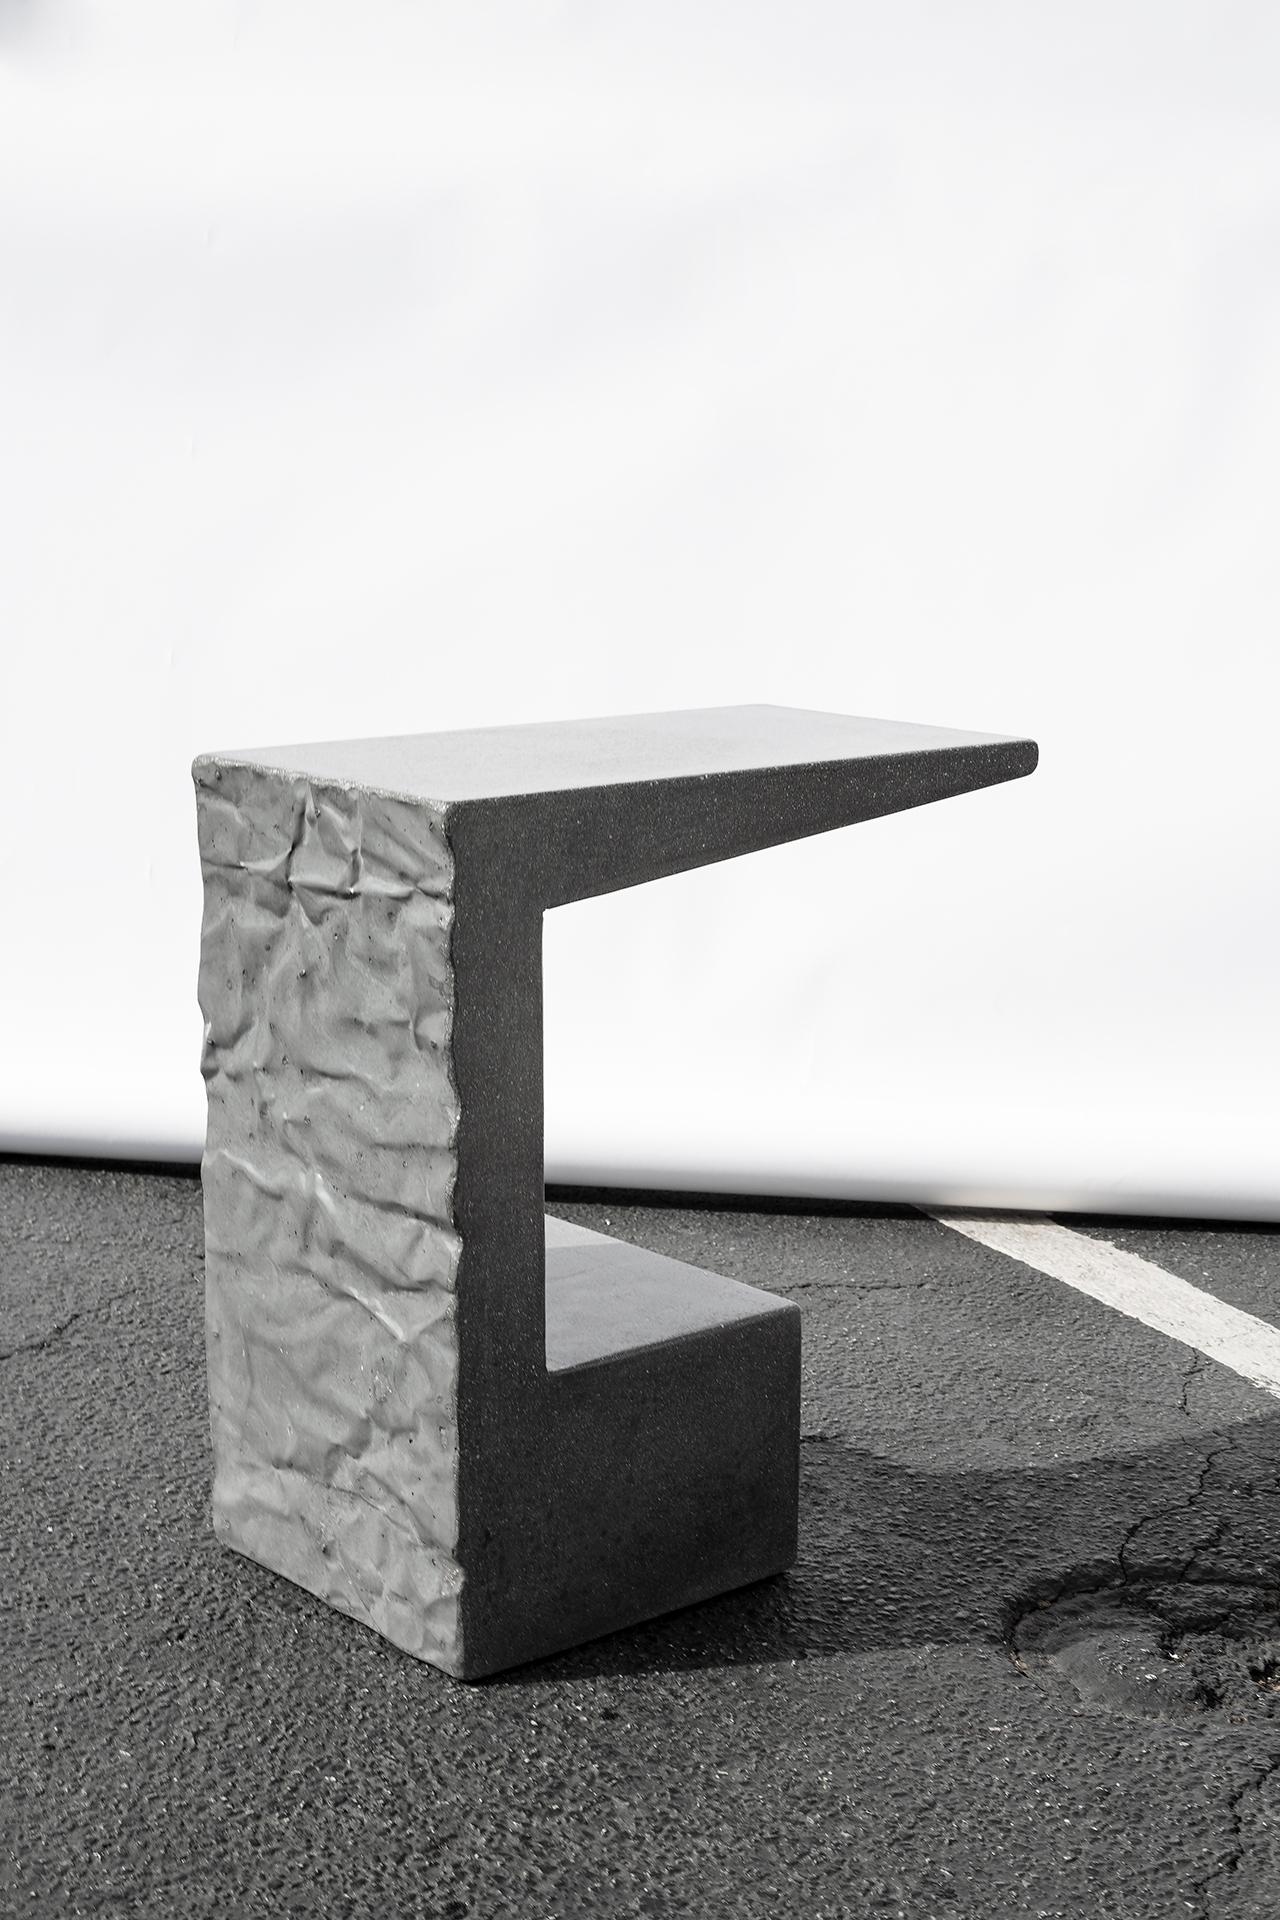 Unique contemporary side table, made of solid concrete. This table lends modern sophistication to any setting.

Suitable for indoor and outdoor use. 

Available in natural tone, light grey, dark grey, black, white
Premium colors

James de